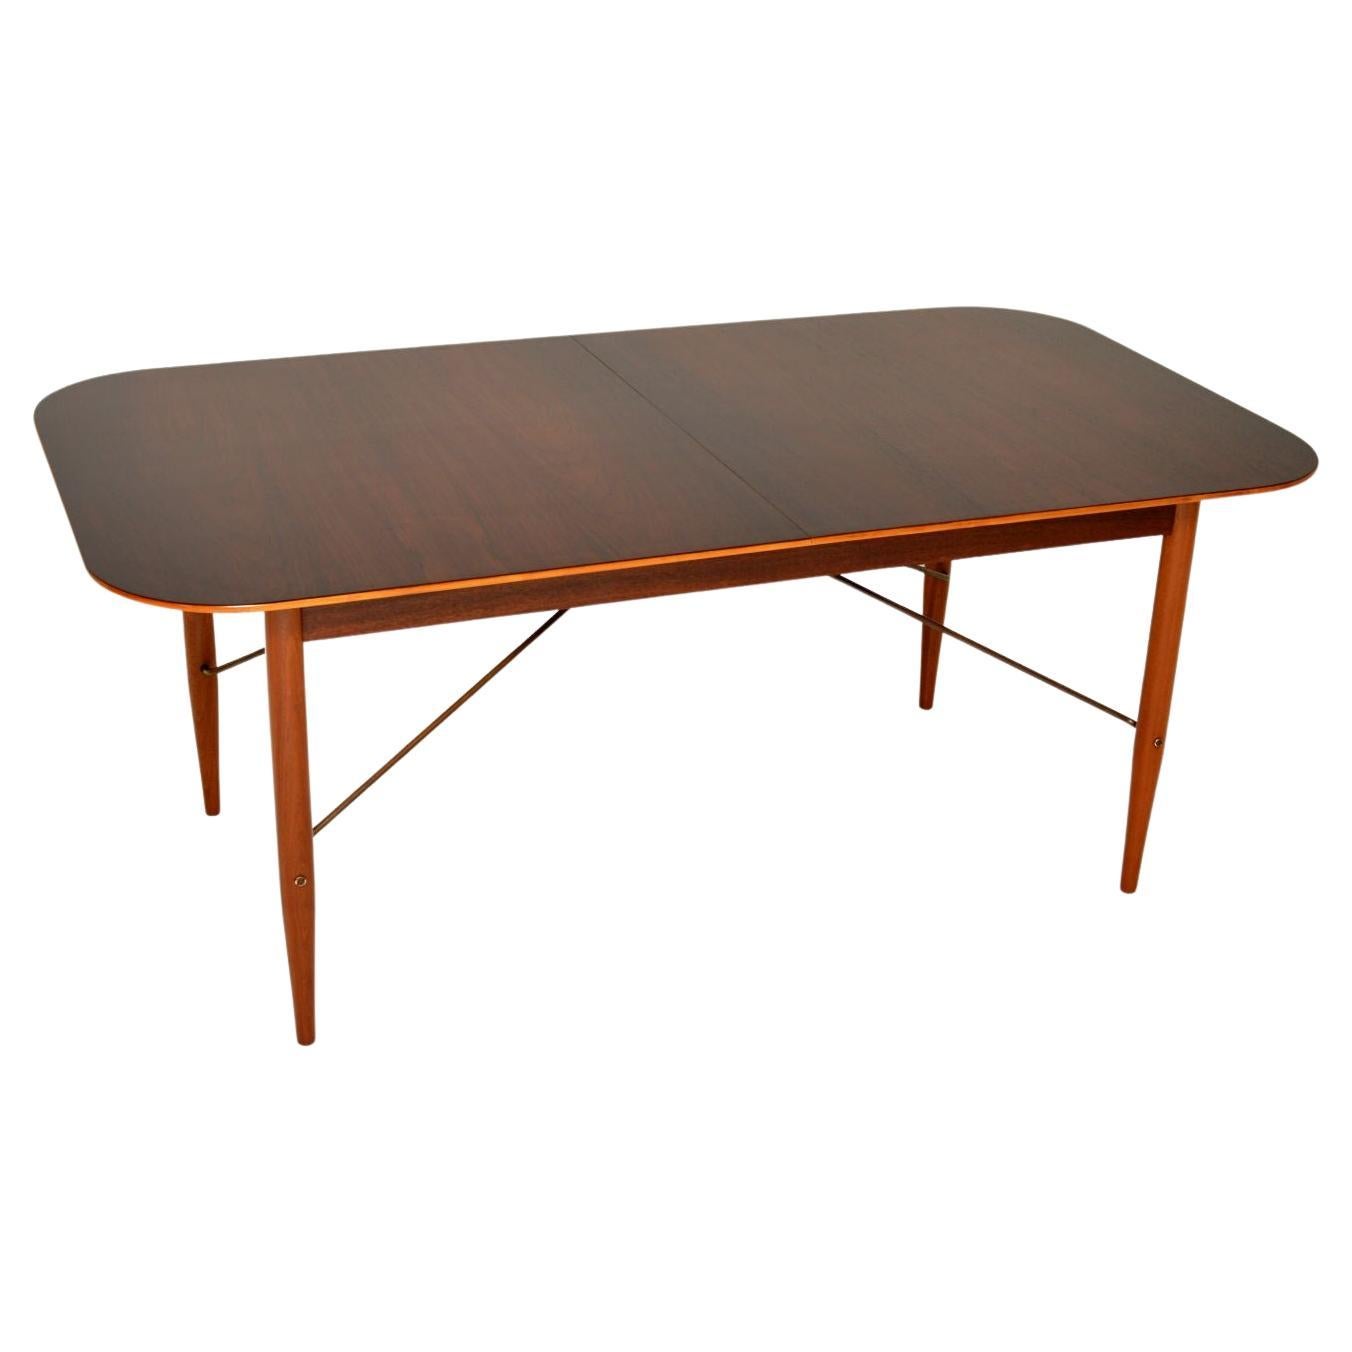 1950’s Dining Table Designed by Robin Day for Hille